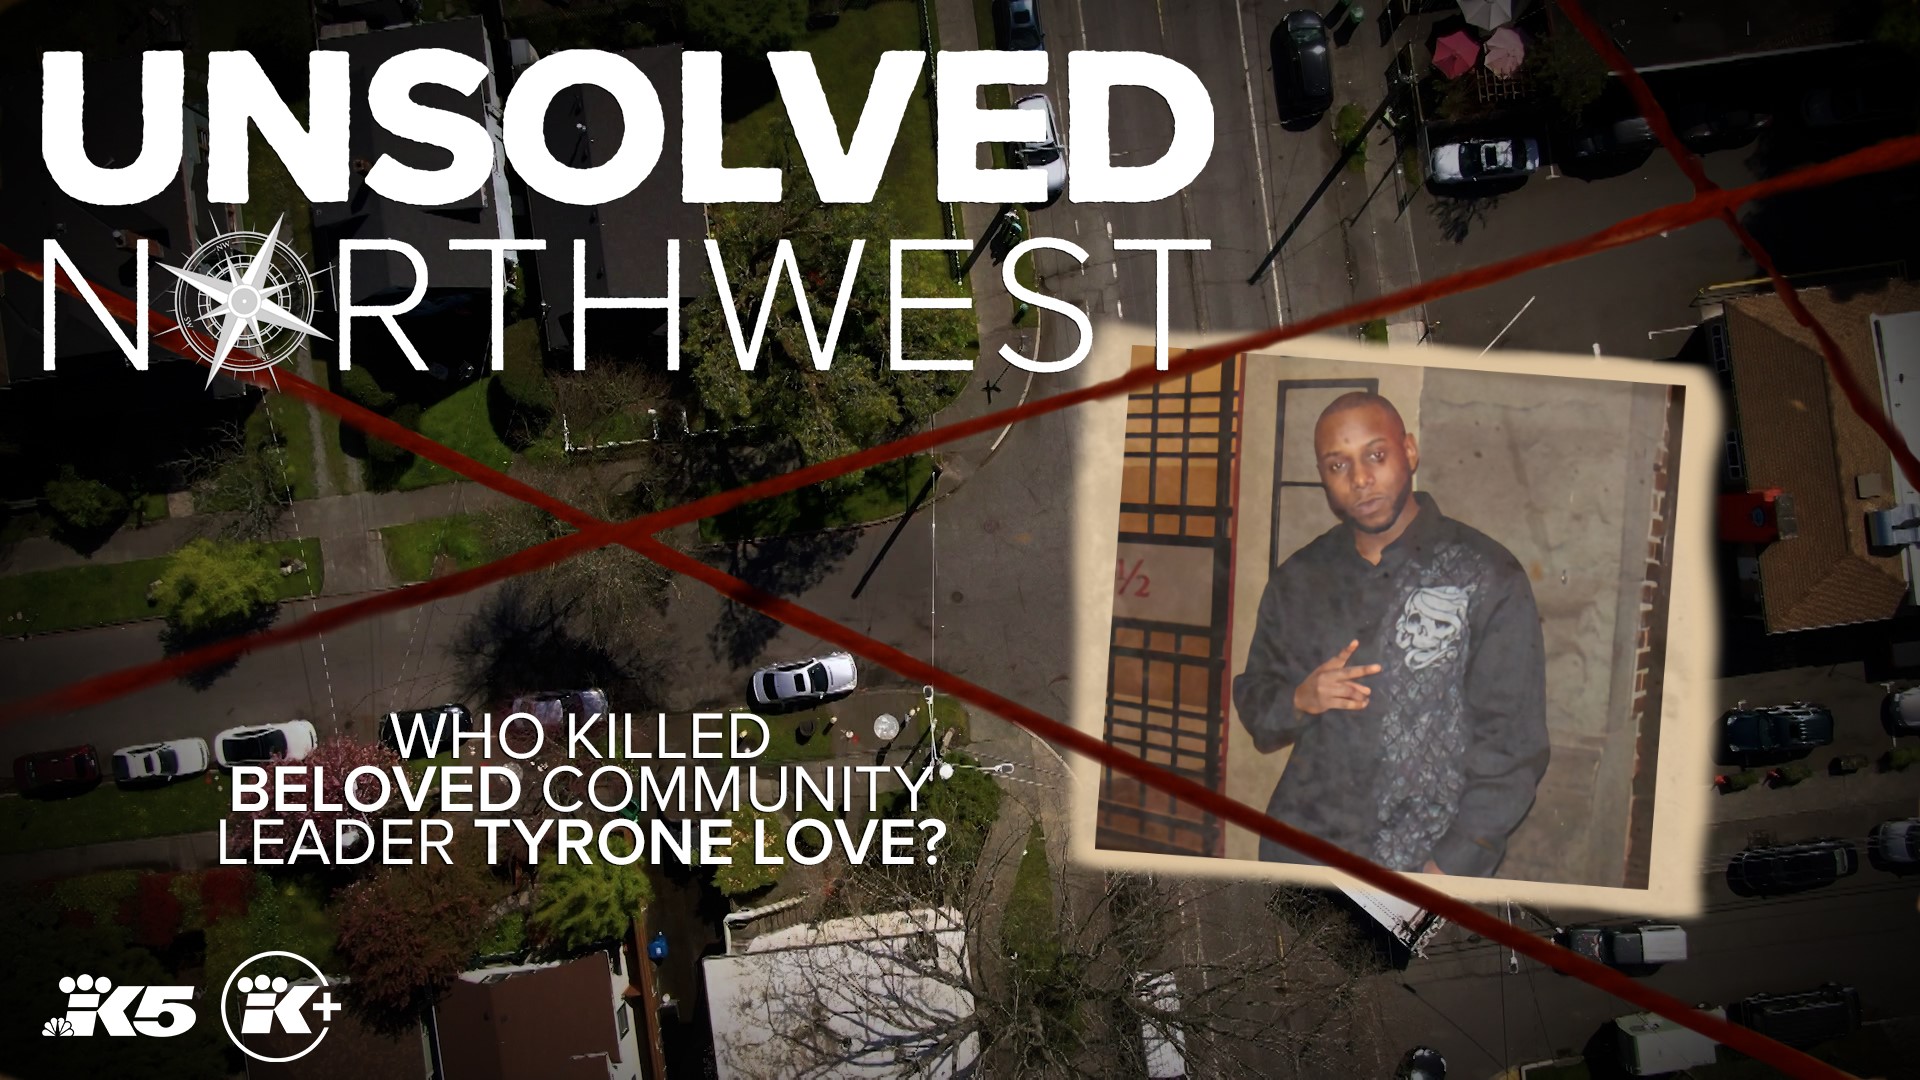 Tyrone Love was fatally shot near Seattle's Pioneer Square. Investigators are still trying to figure out why.